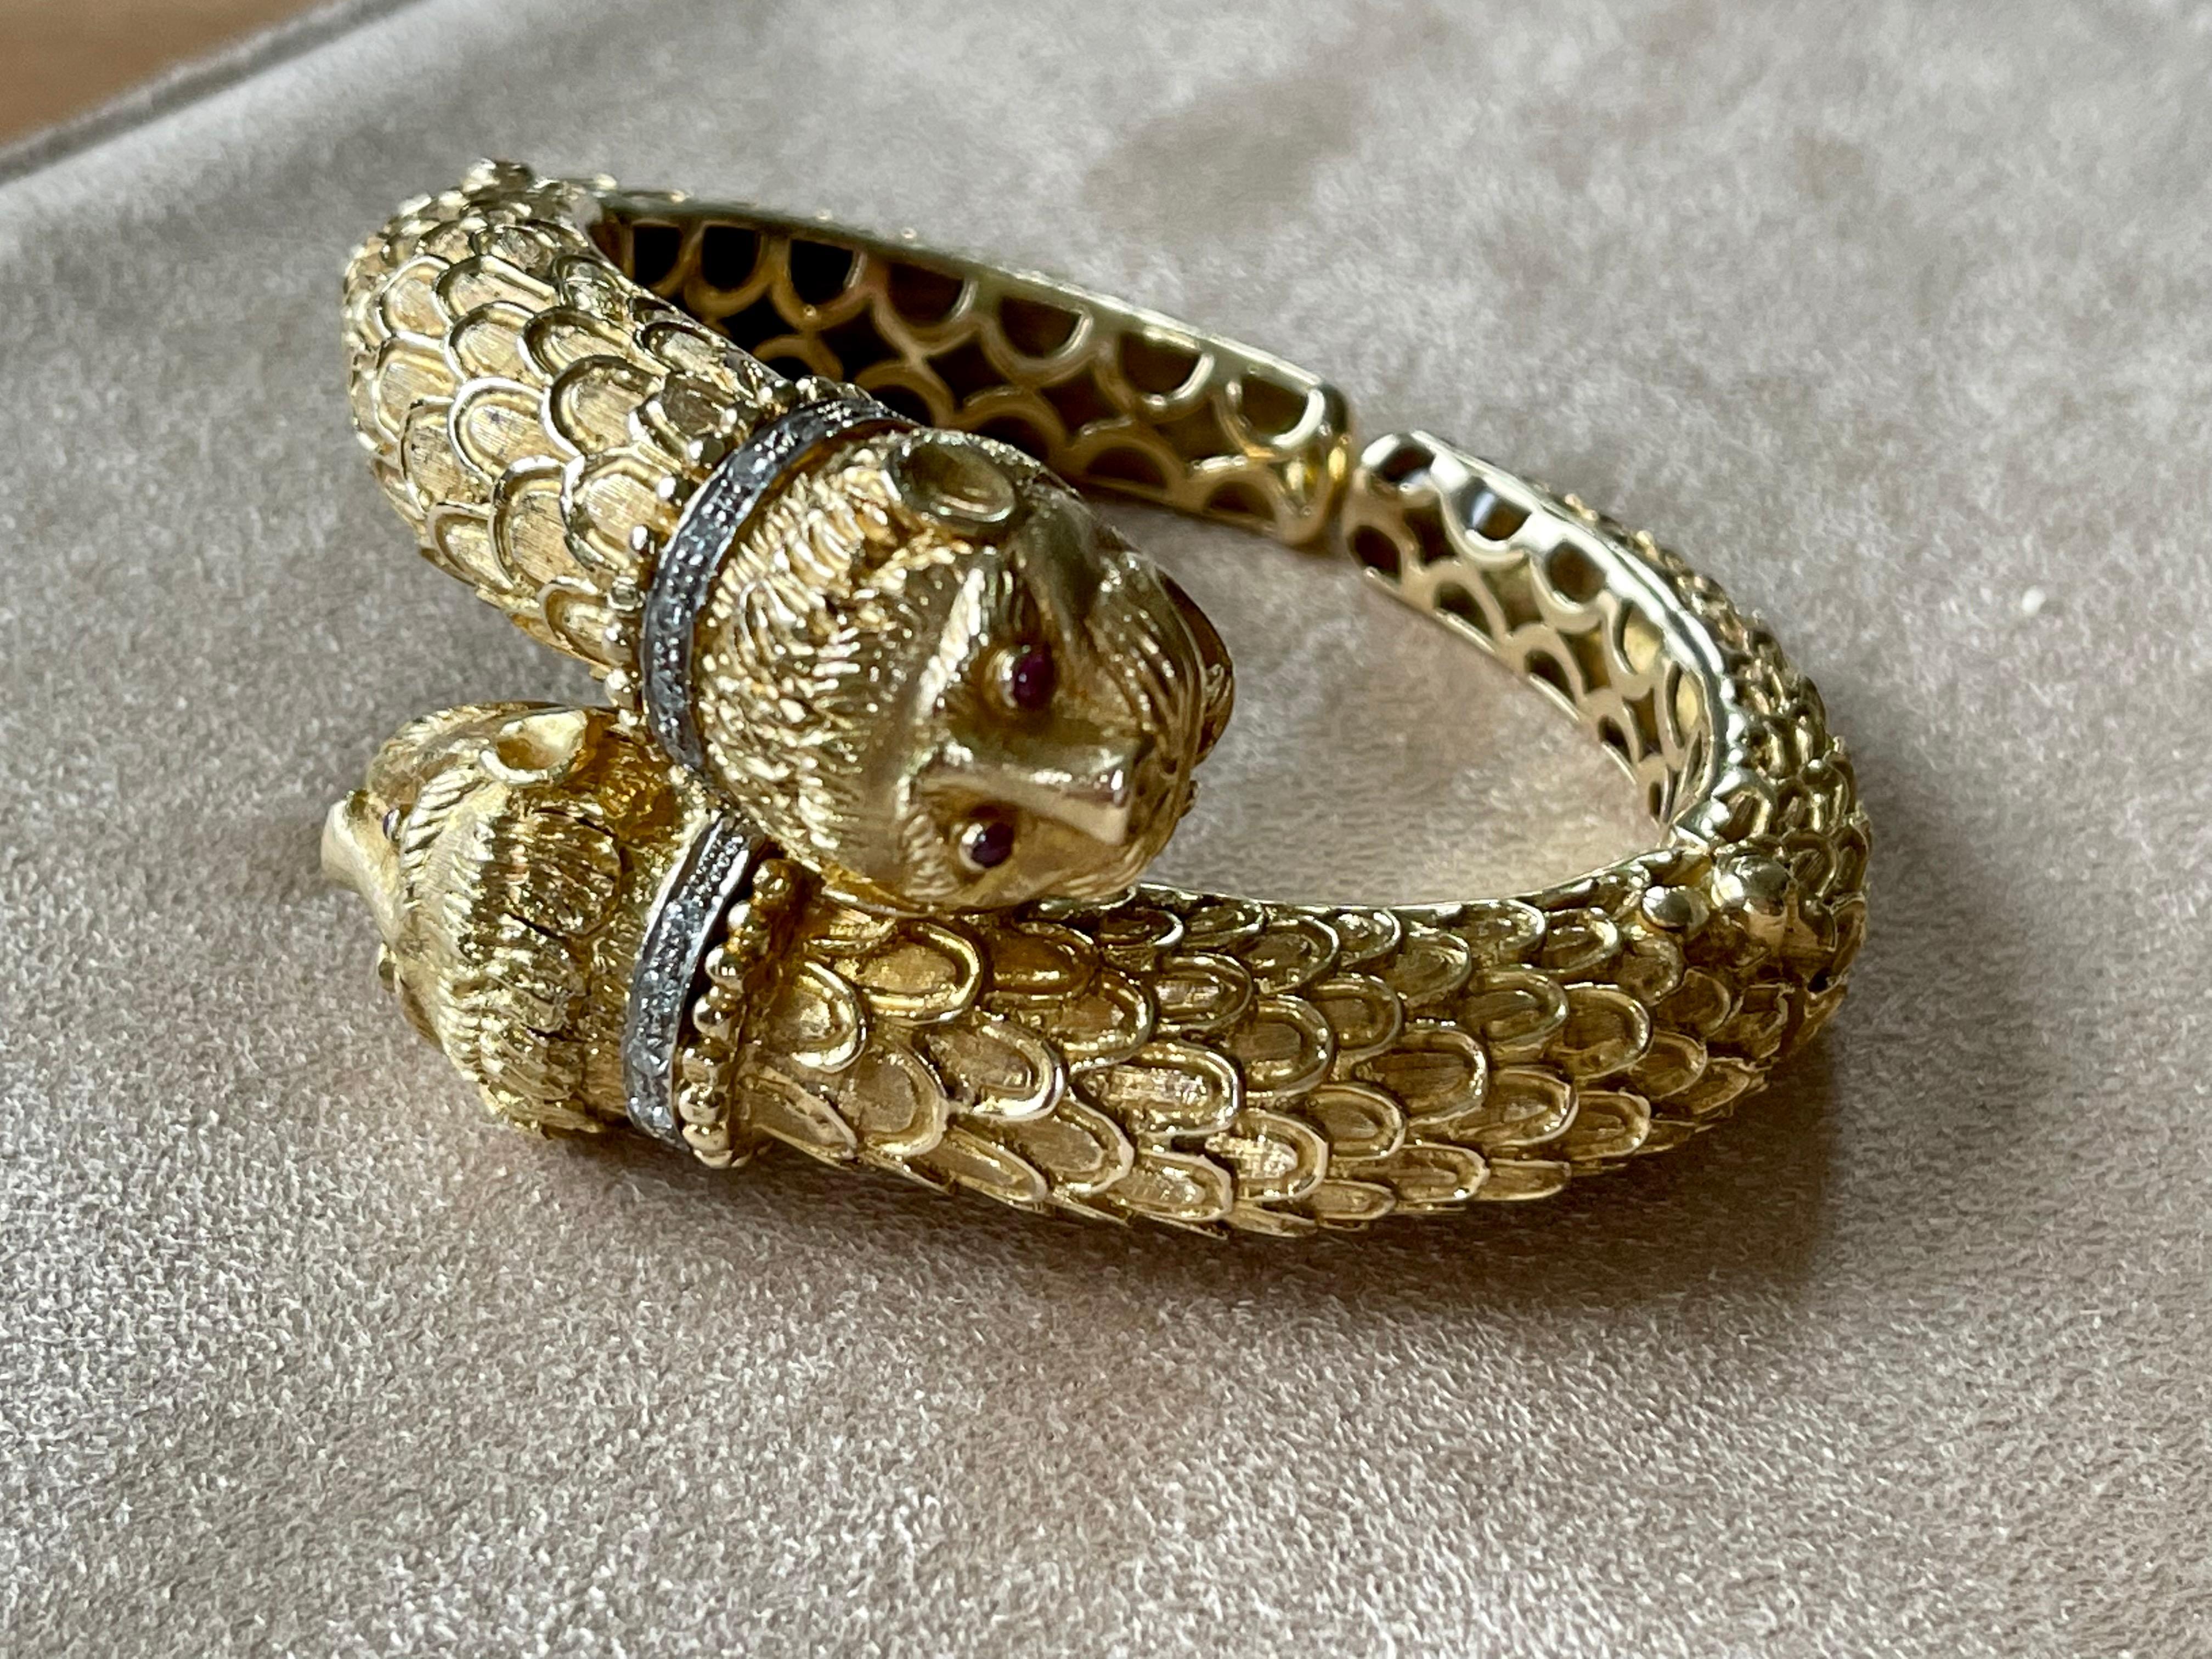 A very solid 18 K yellow Gold bangle bradelet of opposing Lion's heads.
The inner diameter is 5.5 cm that will suit small to medium wrists. The gazing eyes of the 2 lions are created with 4 natural pink Tourmalines. The lions are set with tiny